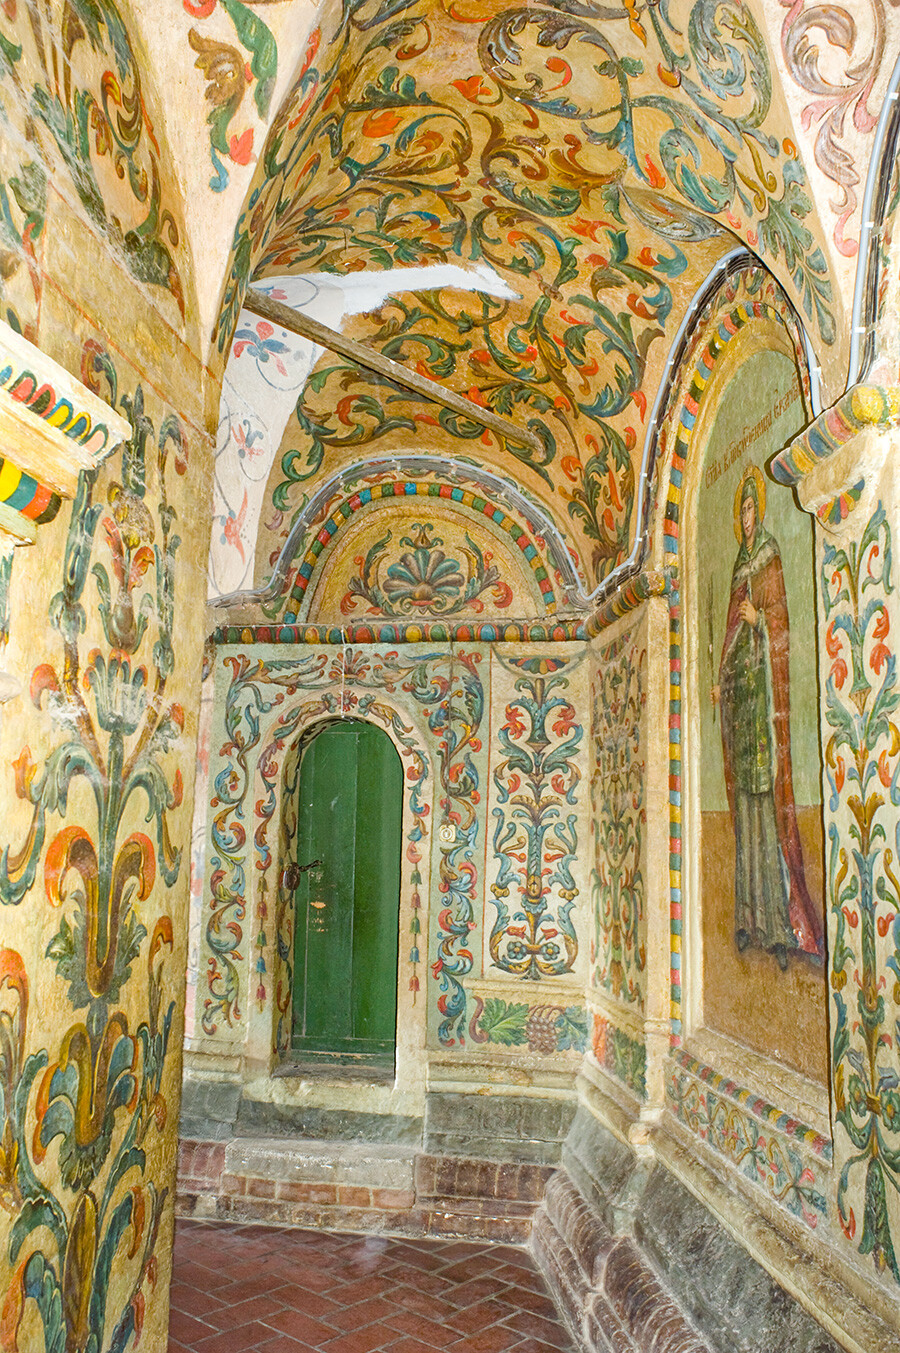 St. Basil's, interior. South gallery passage with 19th-century wall paintings. Left: painting of St. Catherine. June 2, 2012.